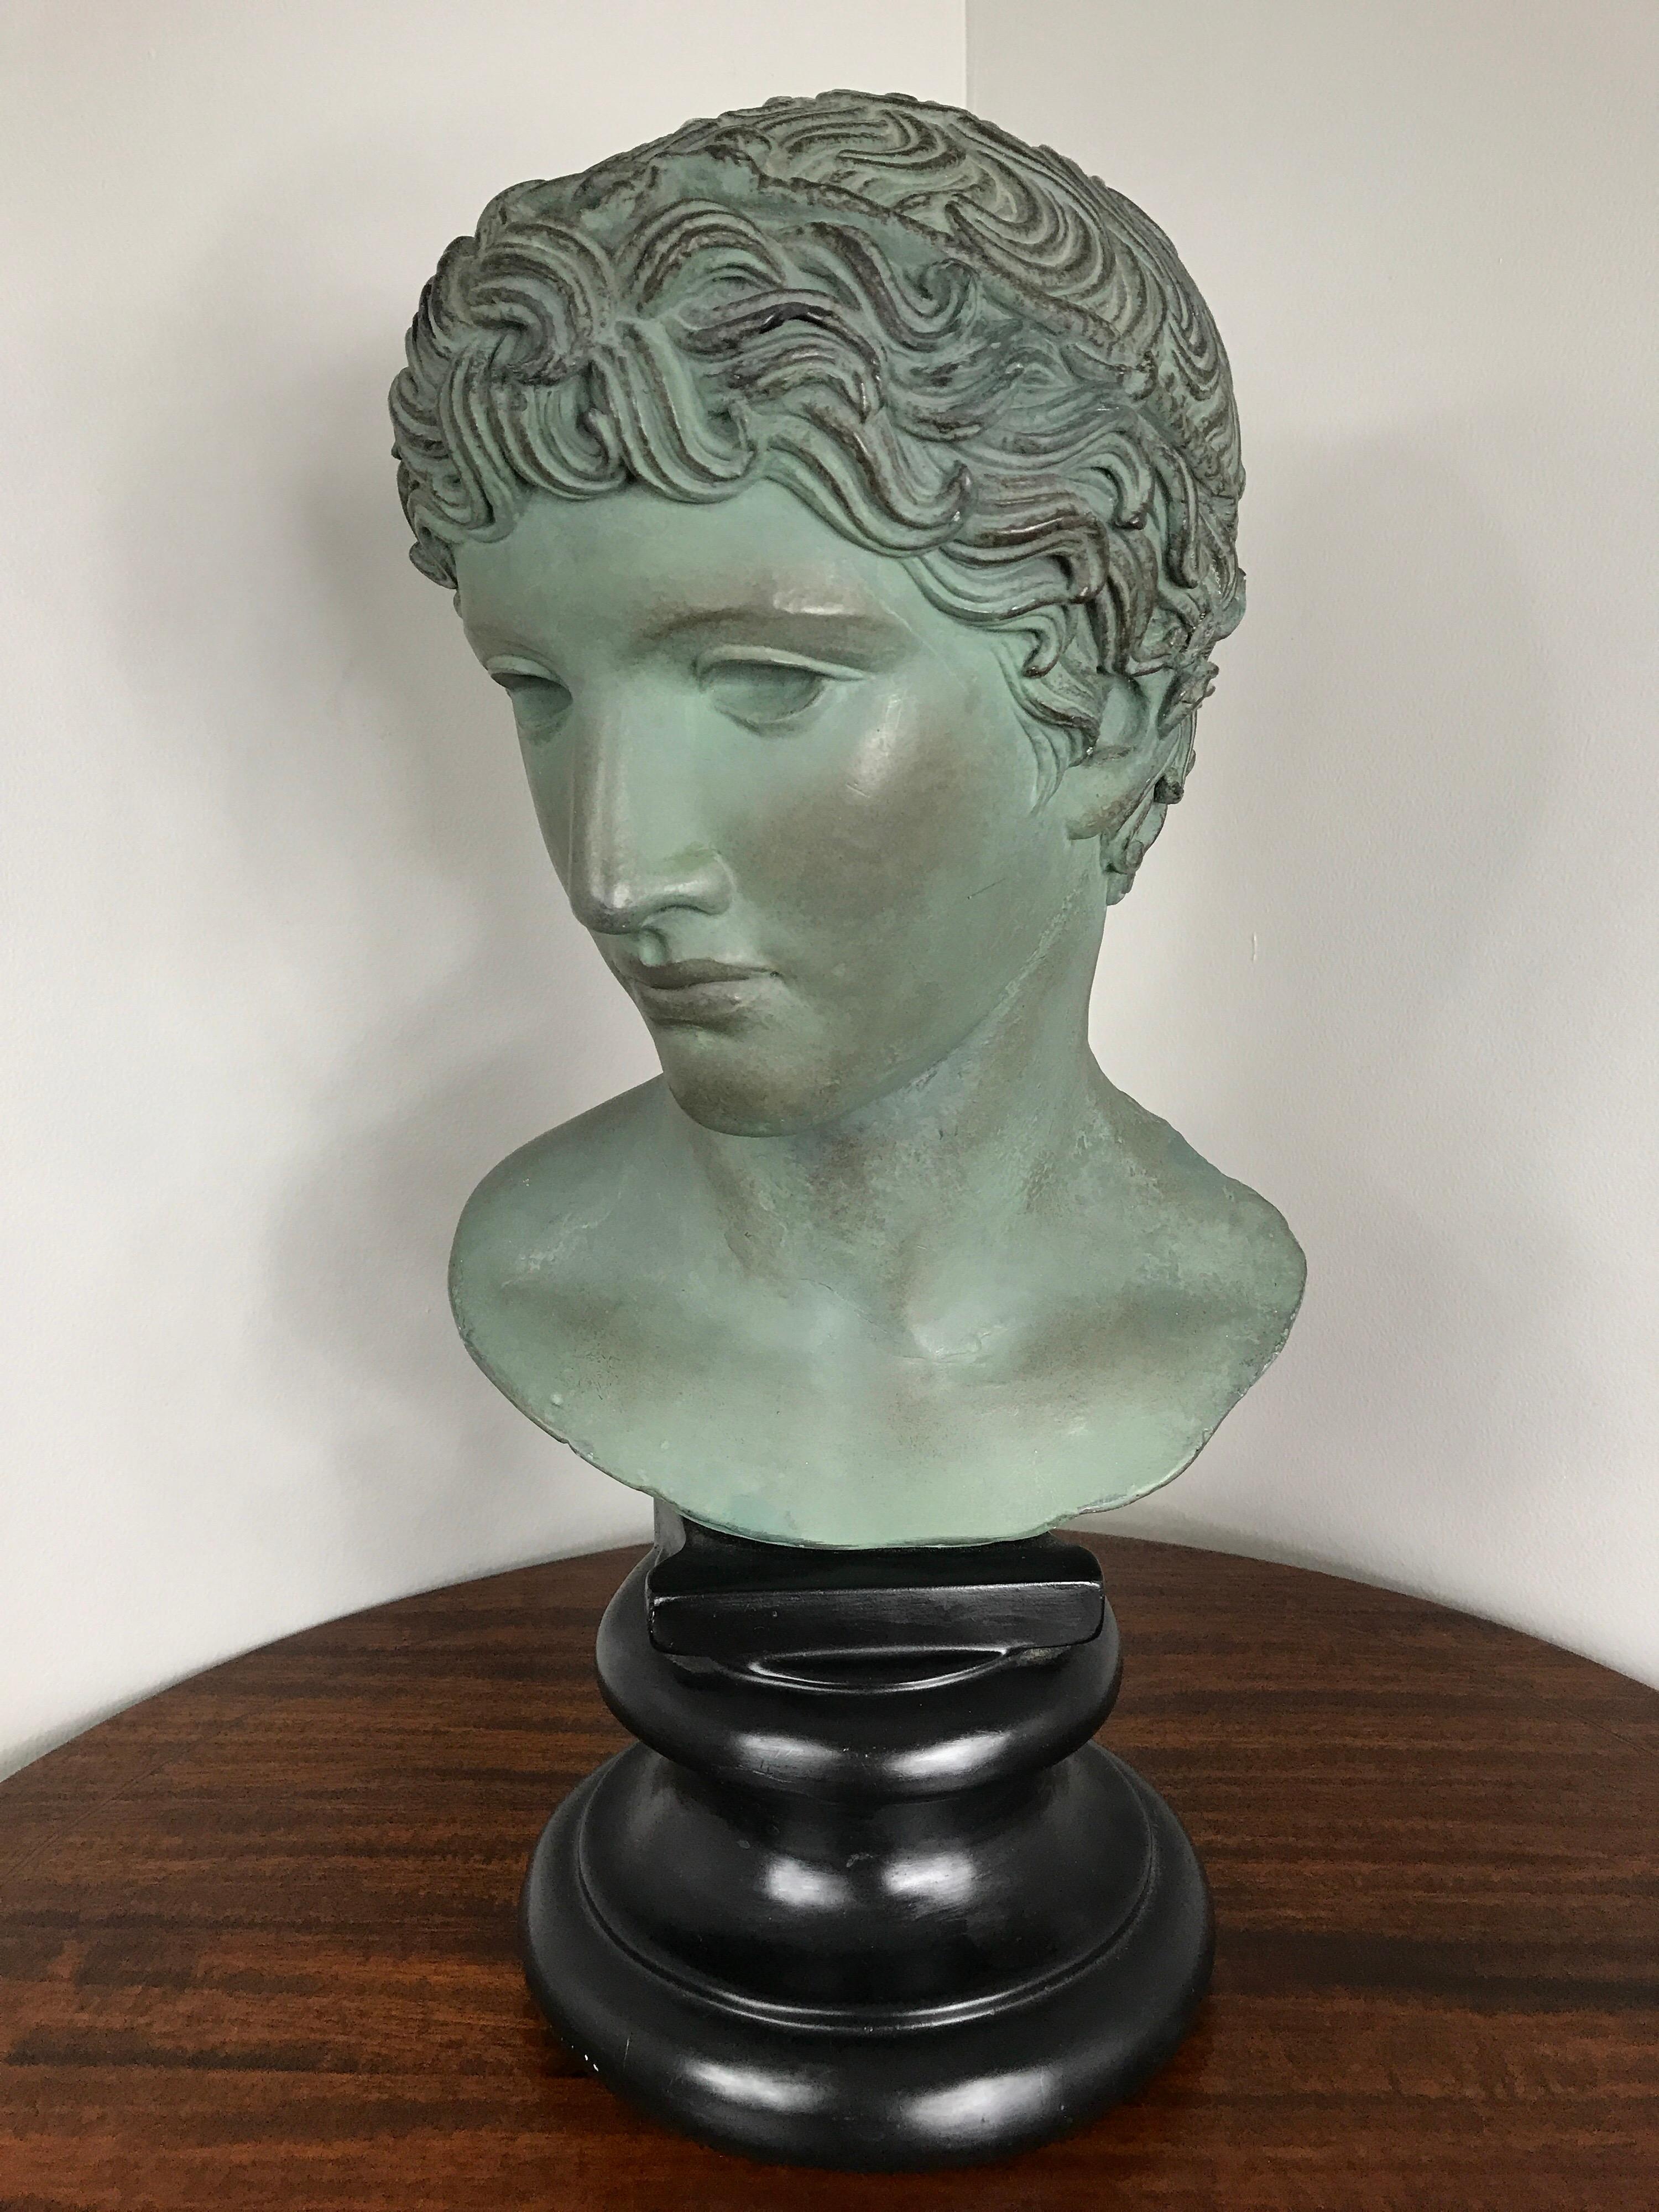 A 20th century plaster bust of Apollo by Alva Studios. Museum quality reproduction of the original.